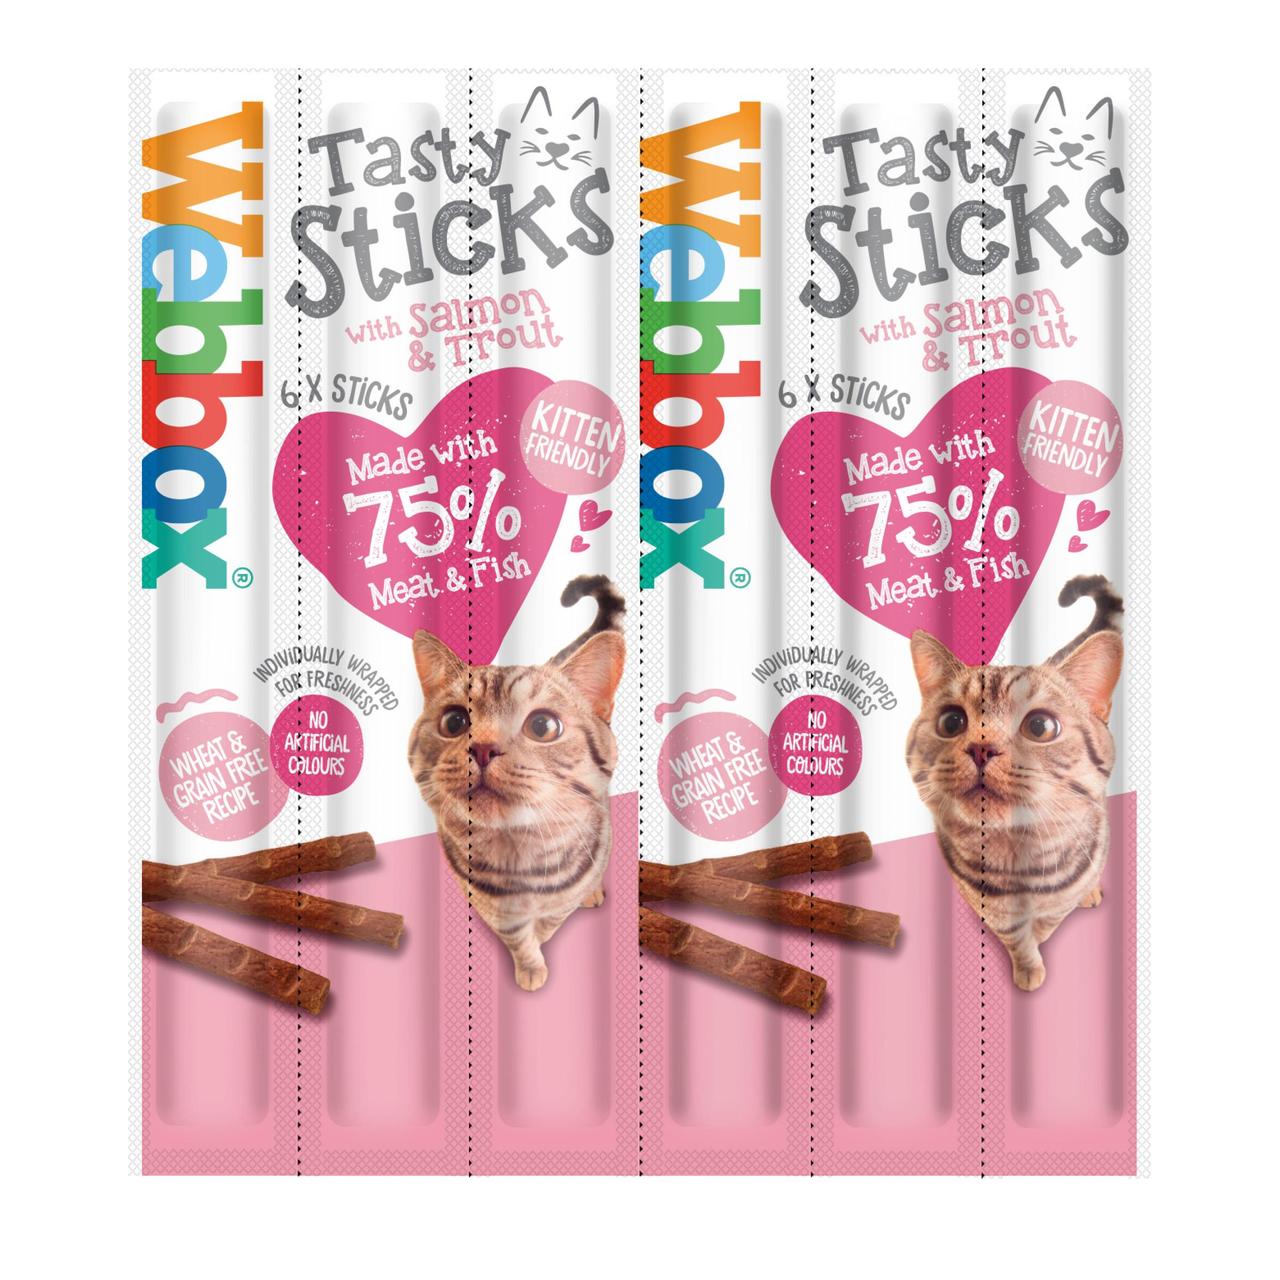 An image of Webbox Cats Delight 6 Tasty Sticks with Salmon & Trout